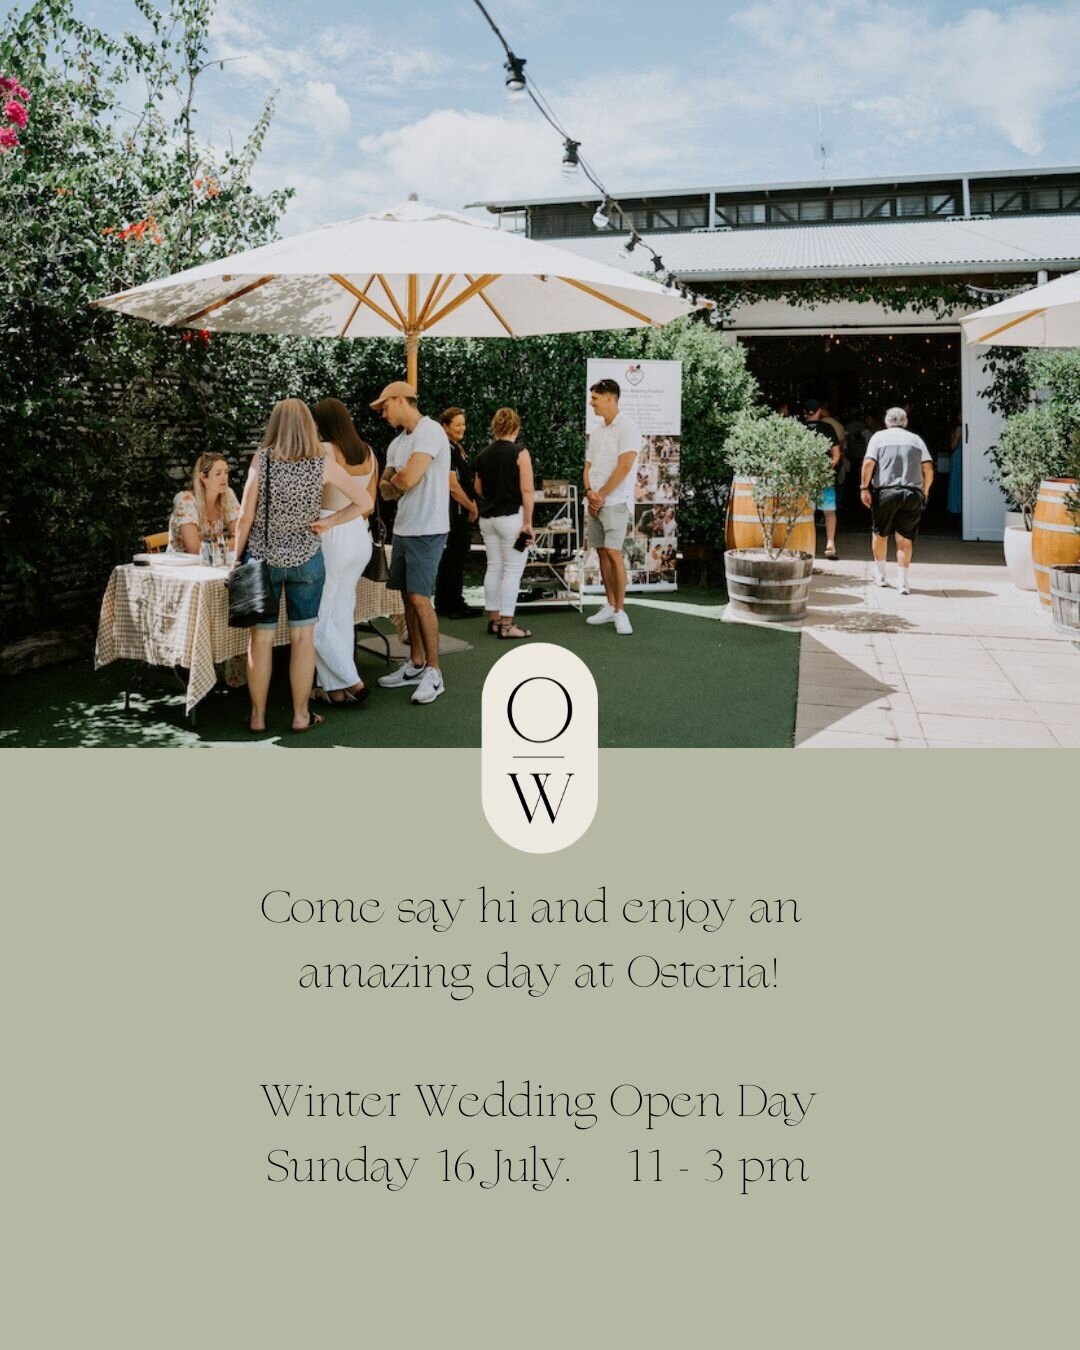 Come down to @osteriawedding for a chat about love illustrations for your wedding along with so many other amazing suppliers. 

Venue - @osteriaweddings
Stylist + Refinery Florist - @jj_style_co
Garden Florist - @ivyandbleuevents
Lighting - @outofthe